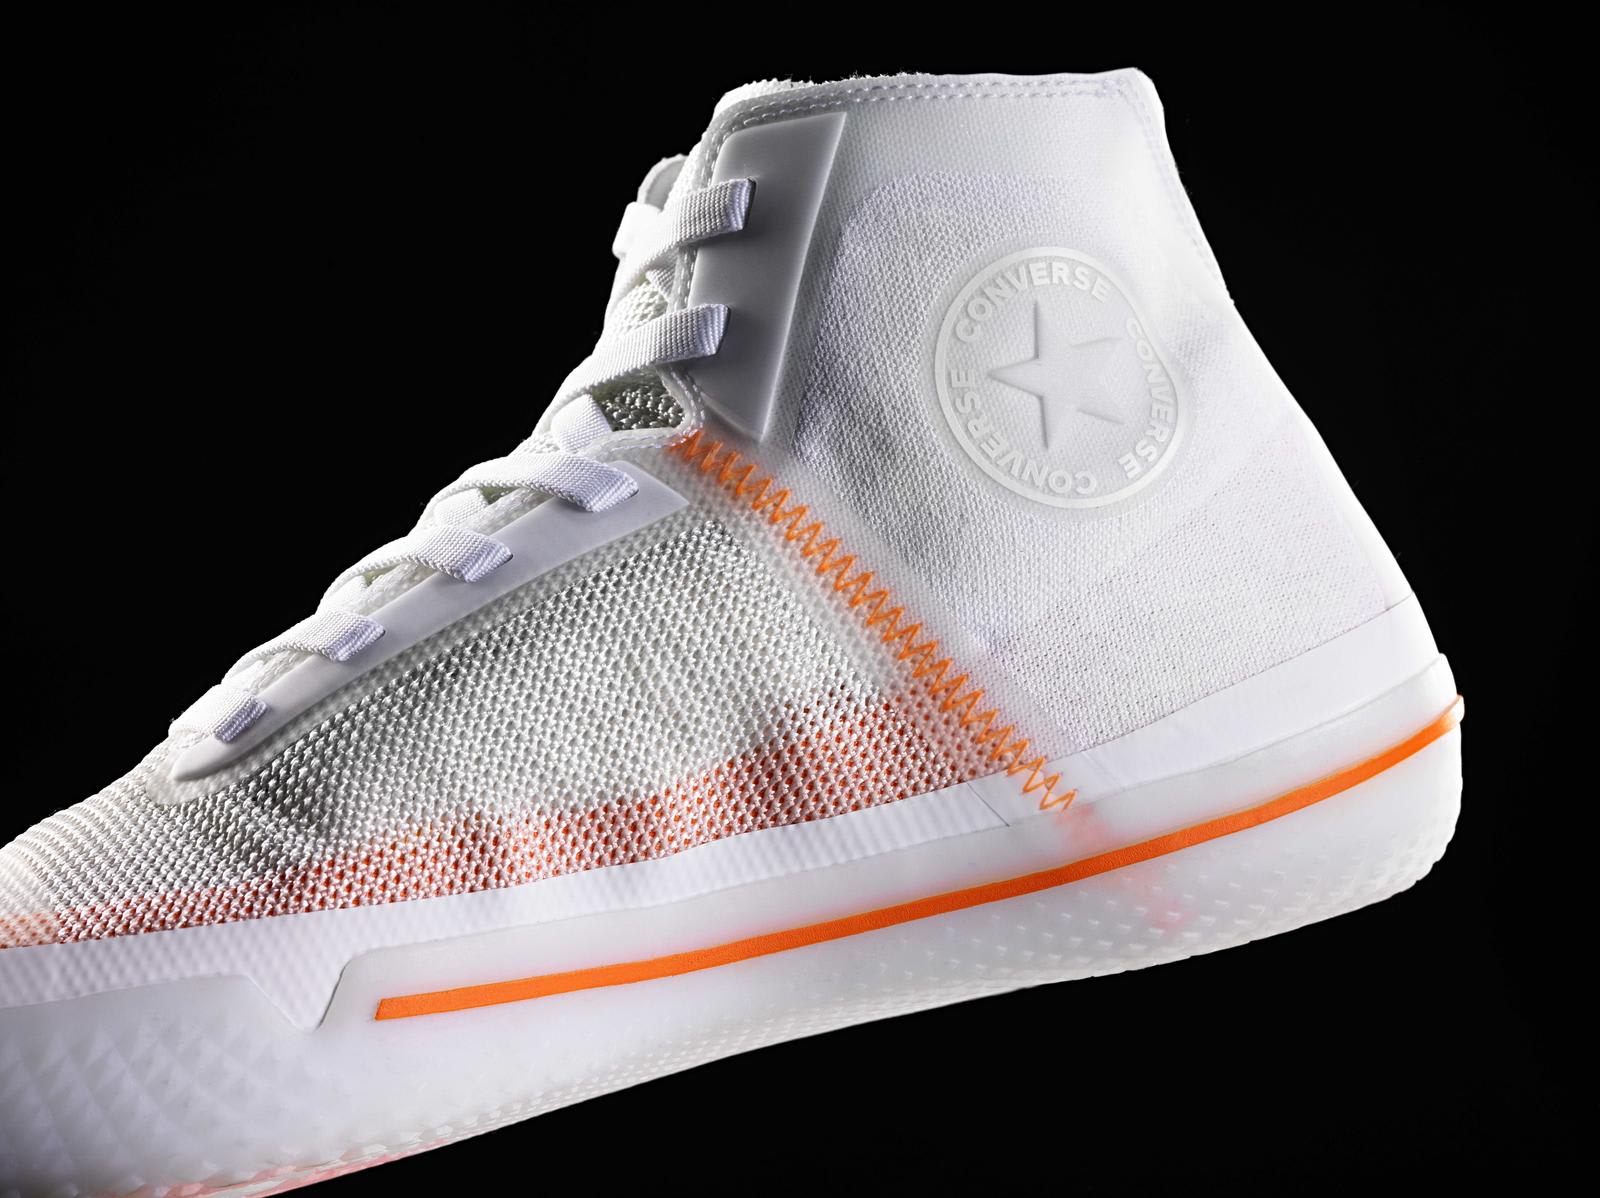 Converse's All Star Pro BB Gets a Release Date